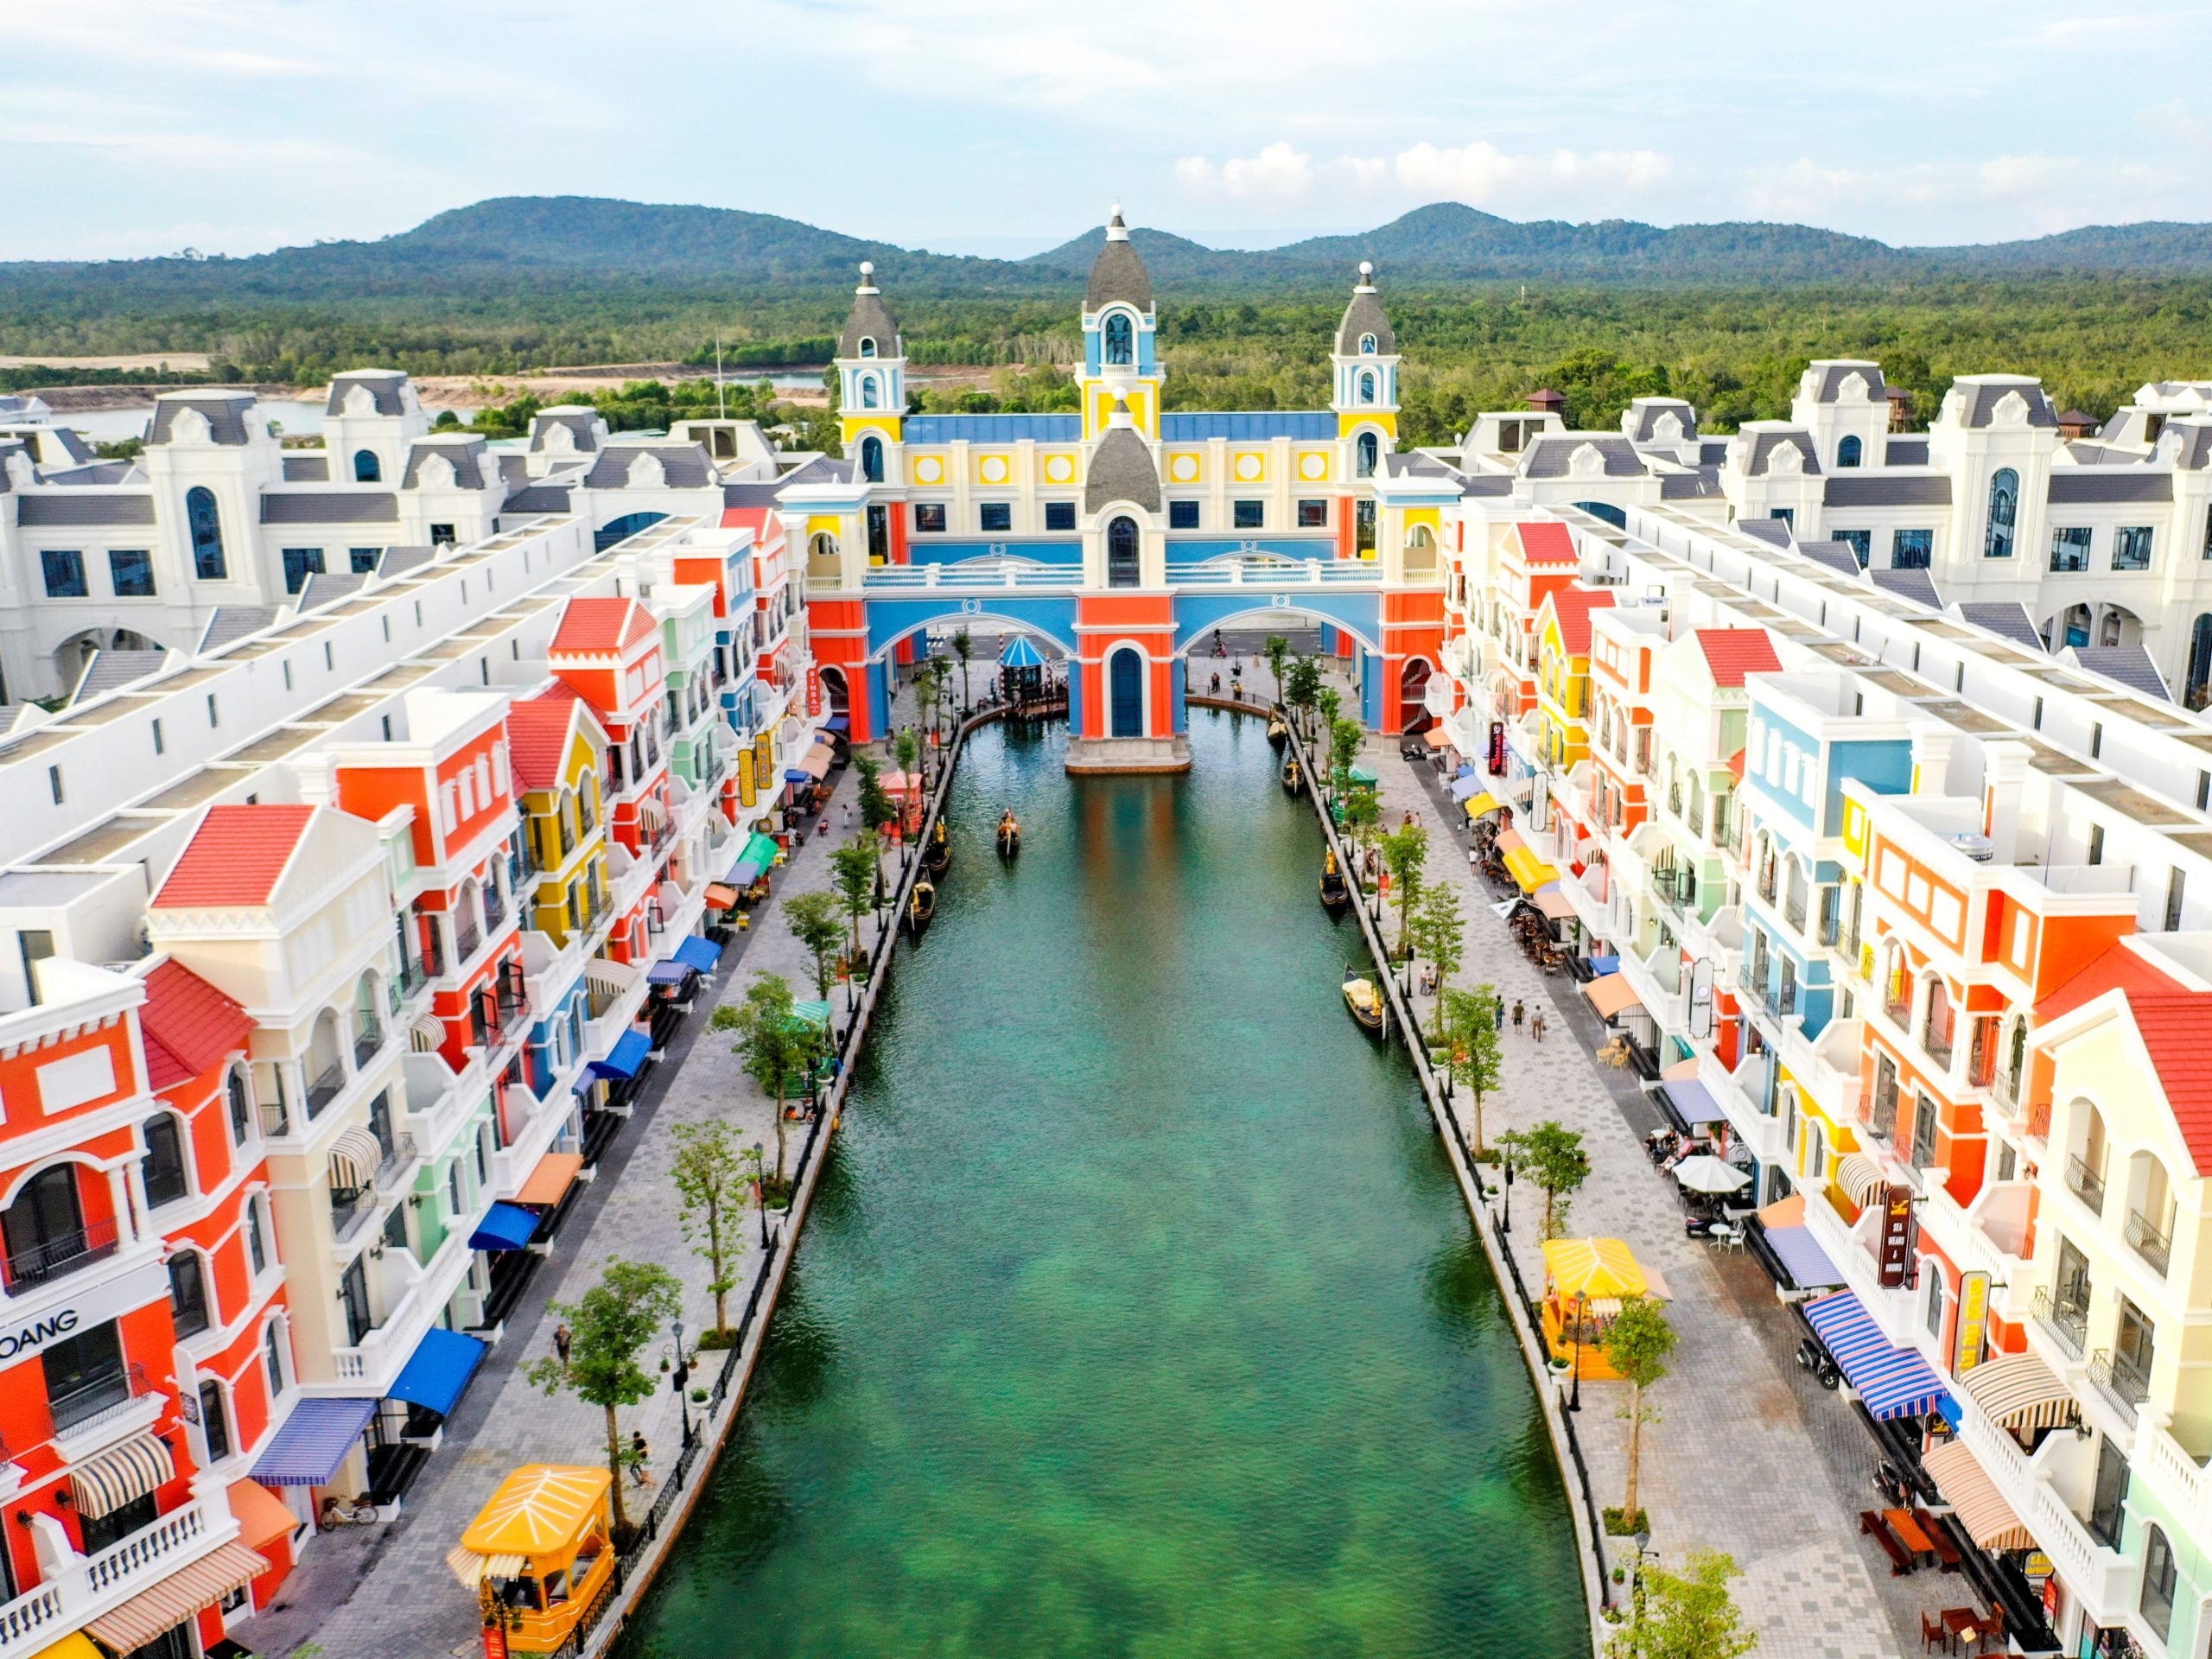 A canal in Vietnam is built up to look like Venice, replete with candy-colored storefronts.